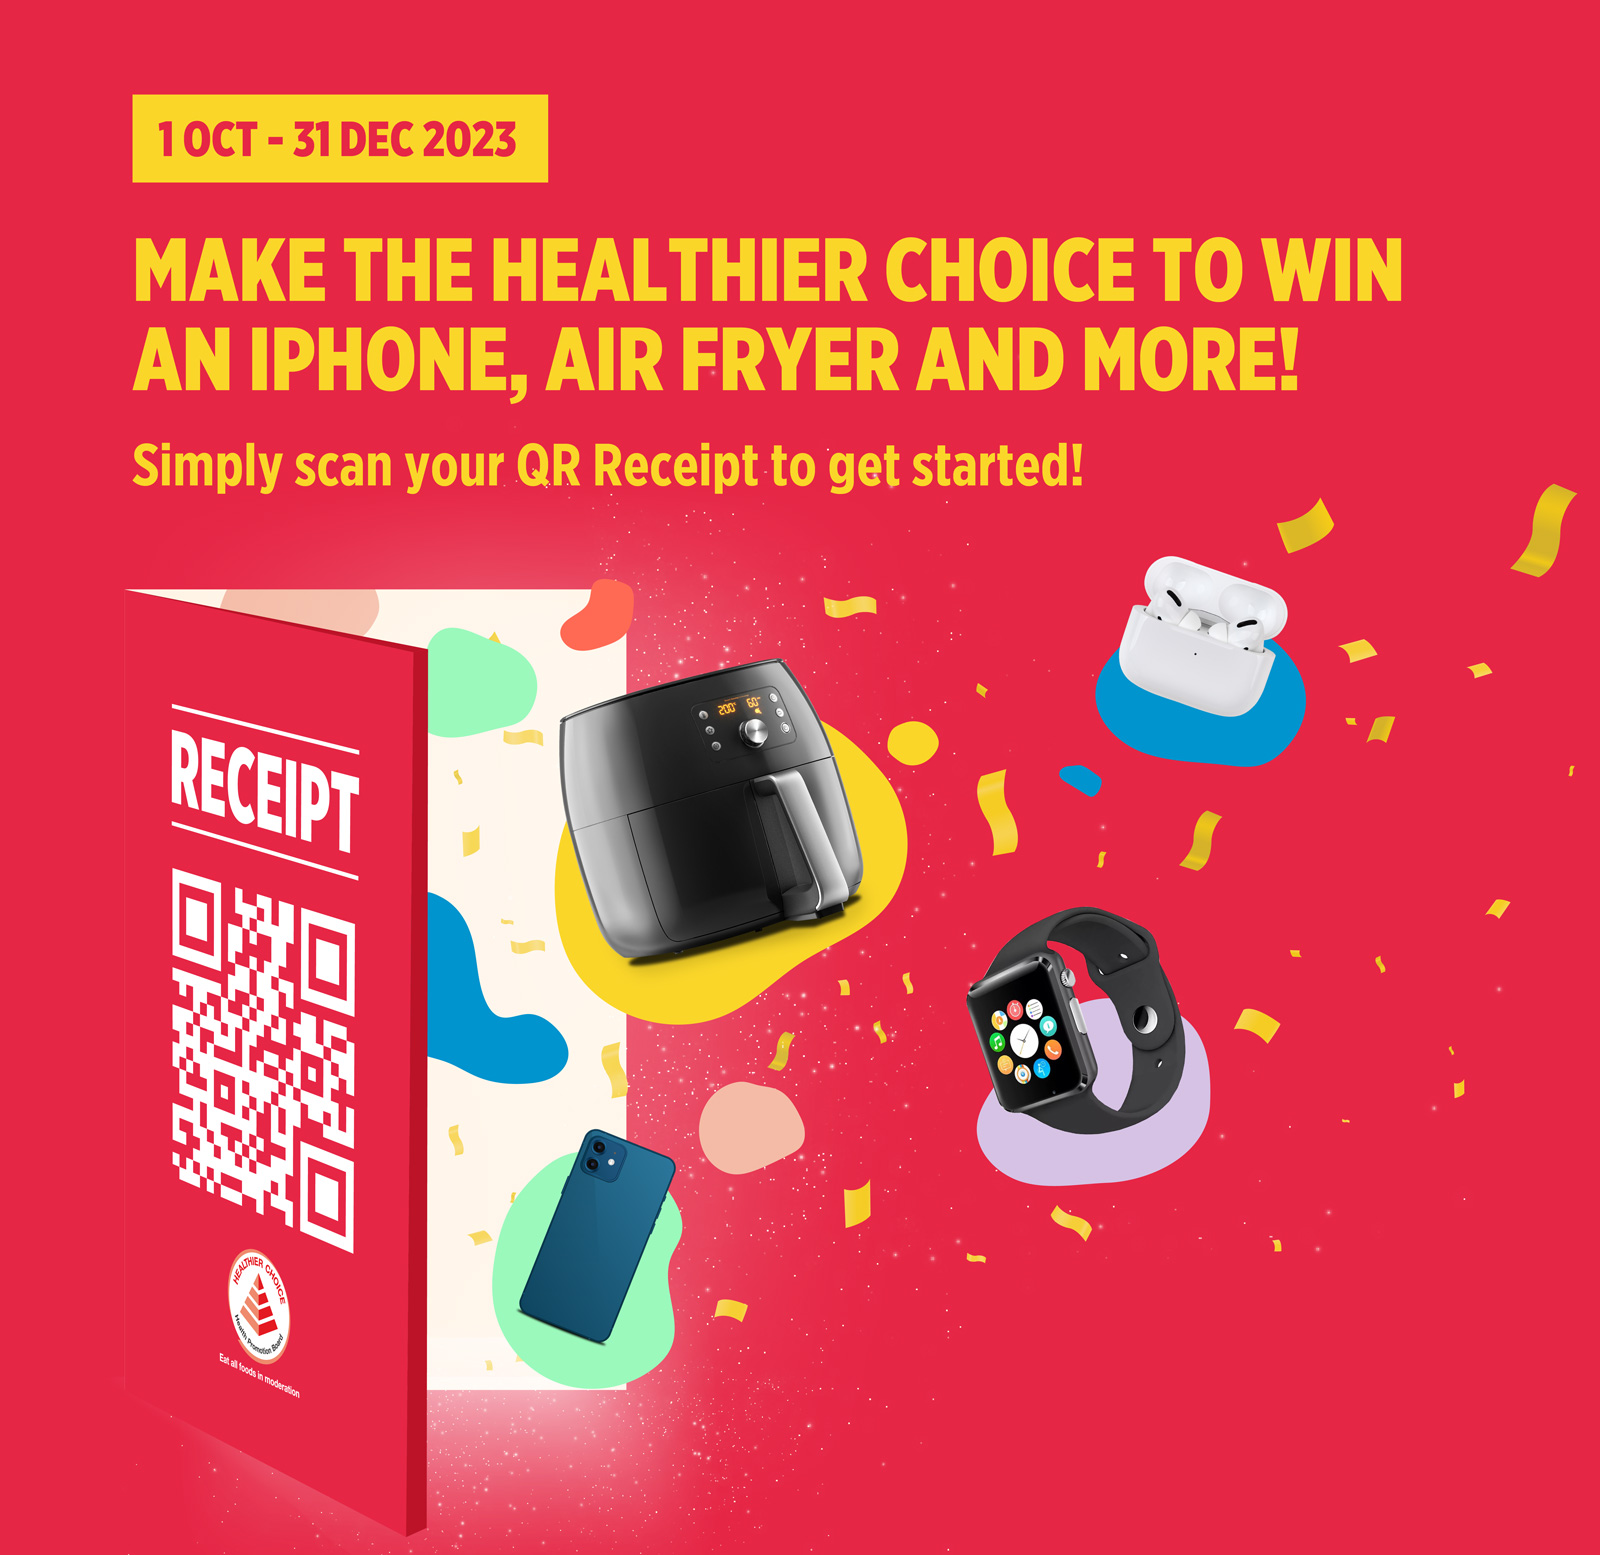 MAKE THE HEALTHIER CHOICE TO WIN AN IPHONE, AIR FRYER AND MORE!